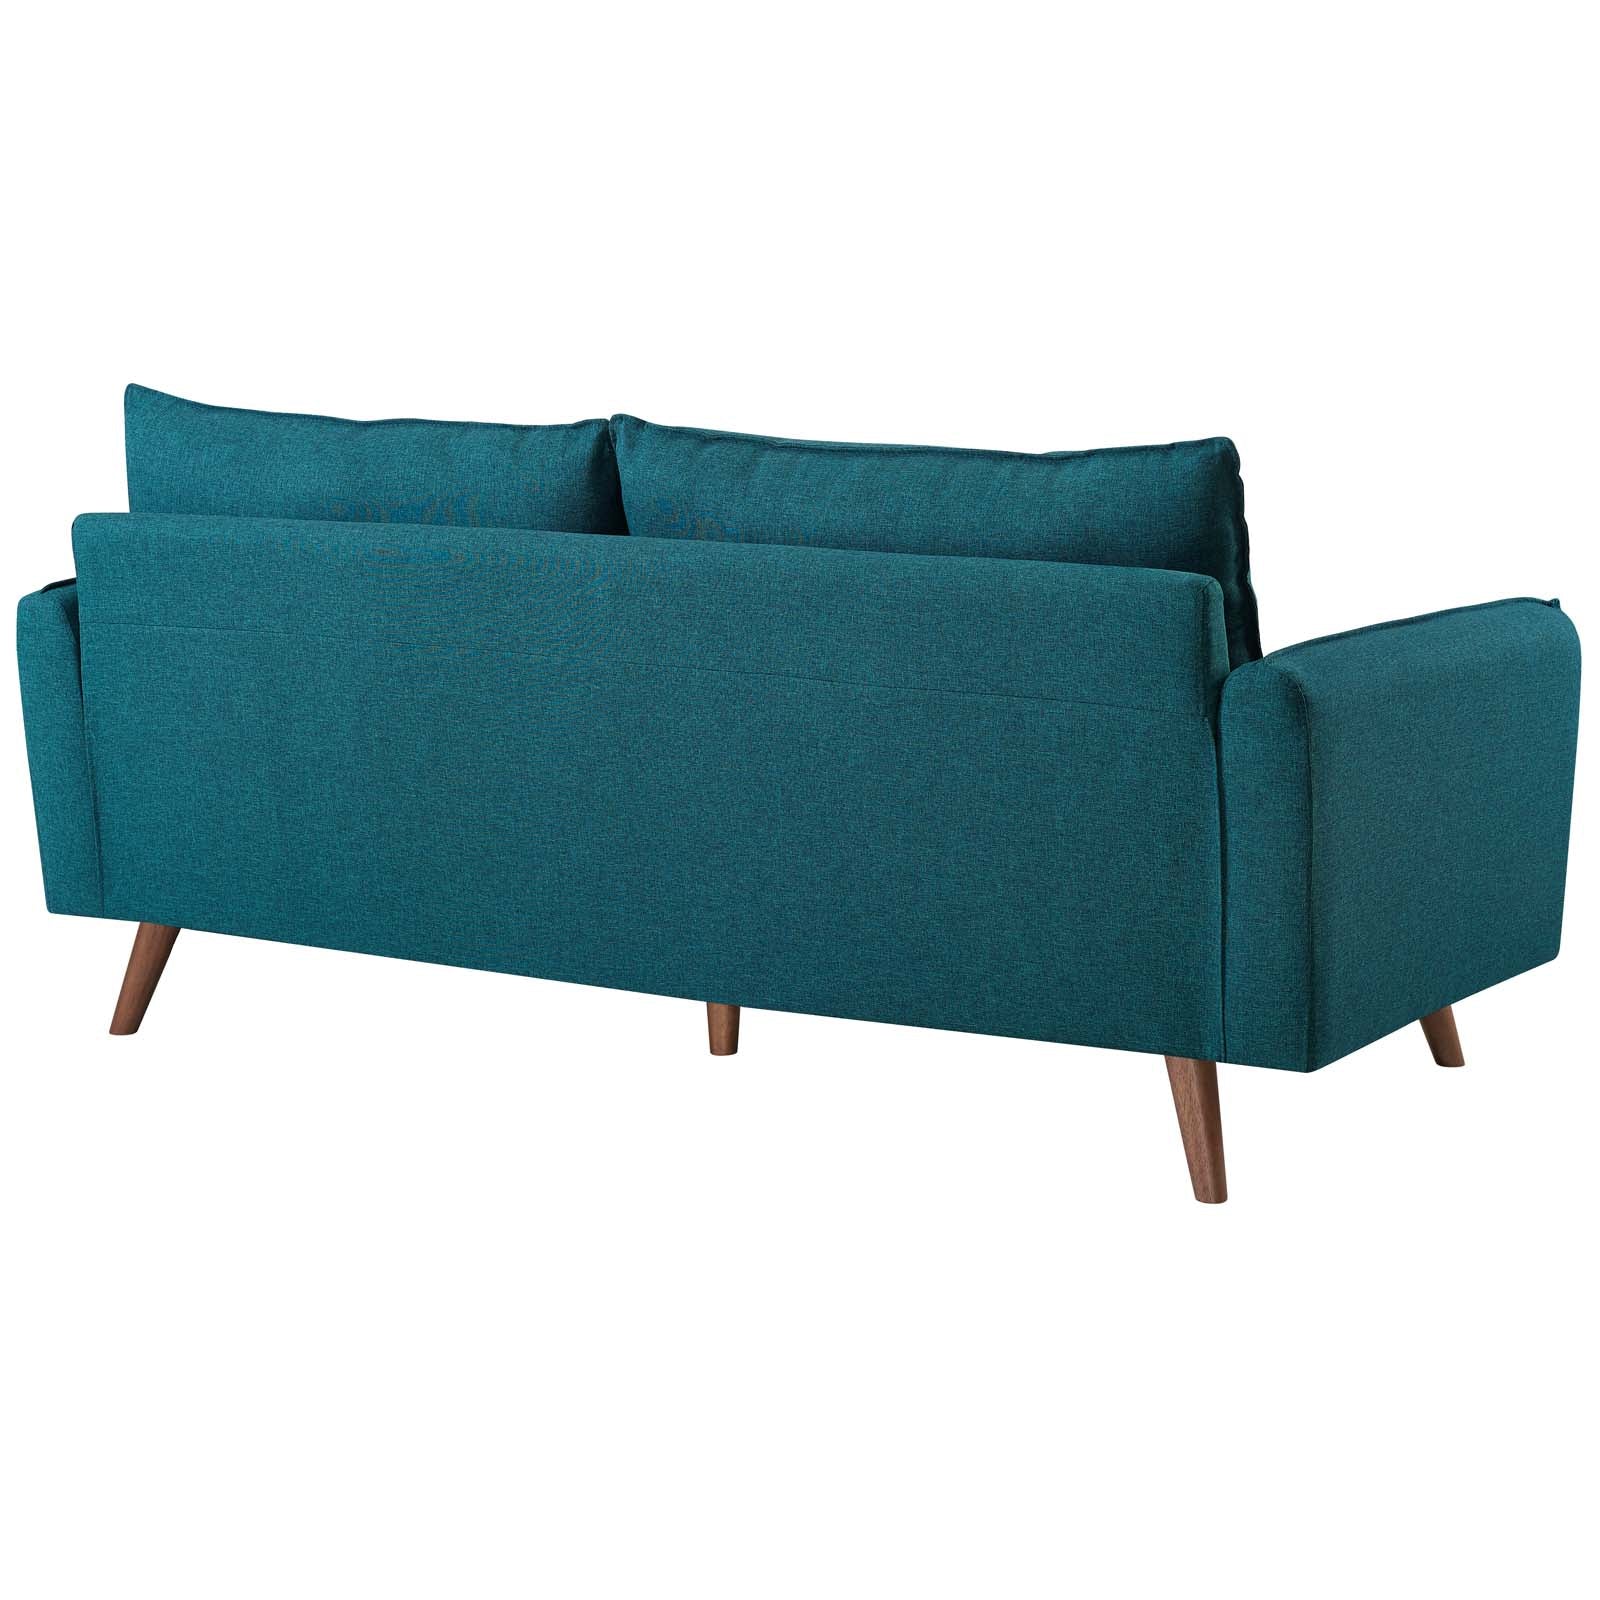 Modway Sofas & Couches - Revive Upholstered Fabric Sofa Teal